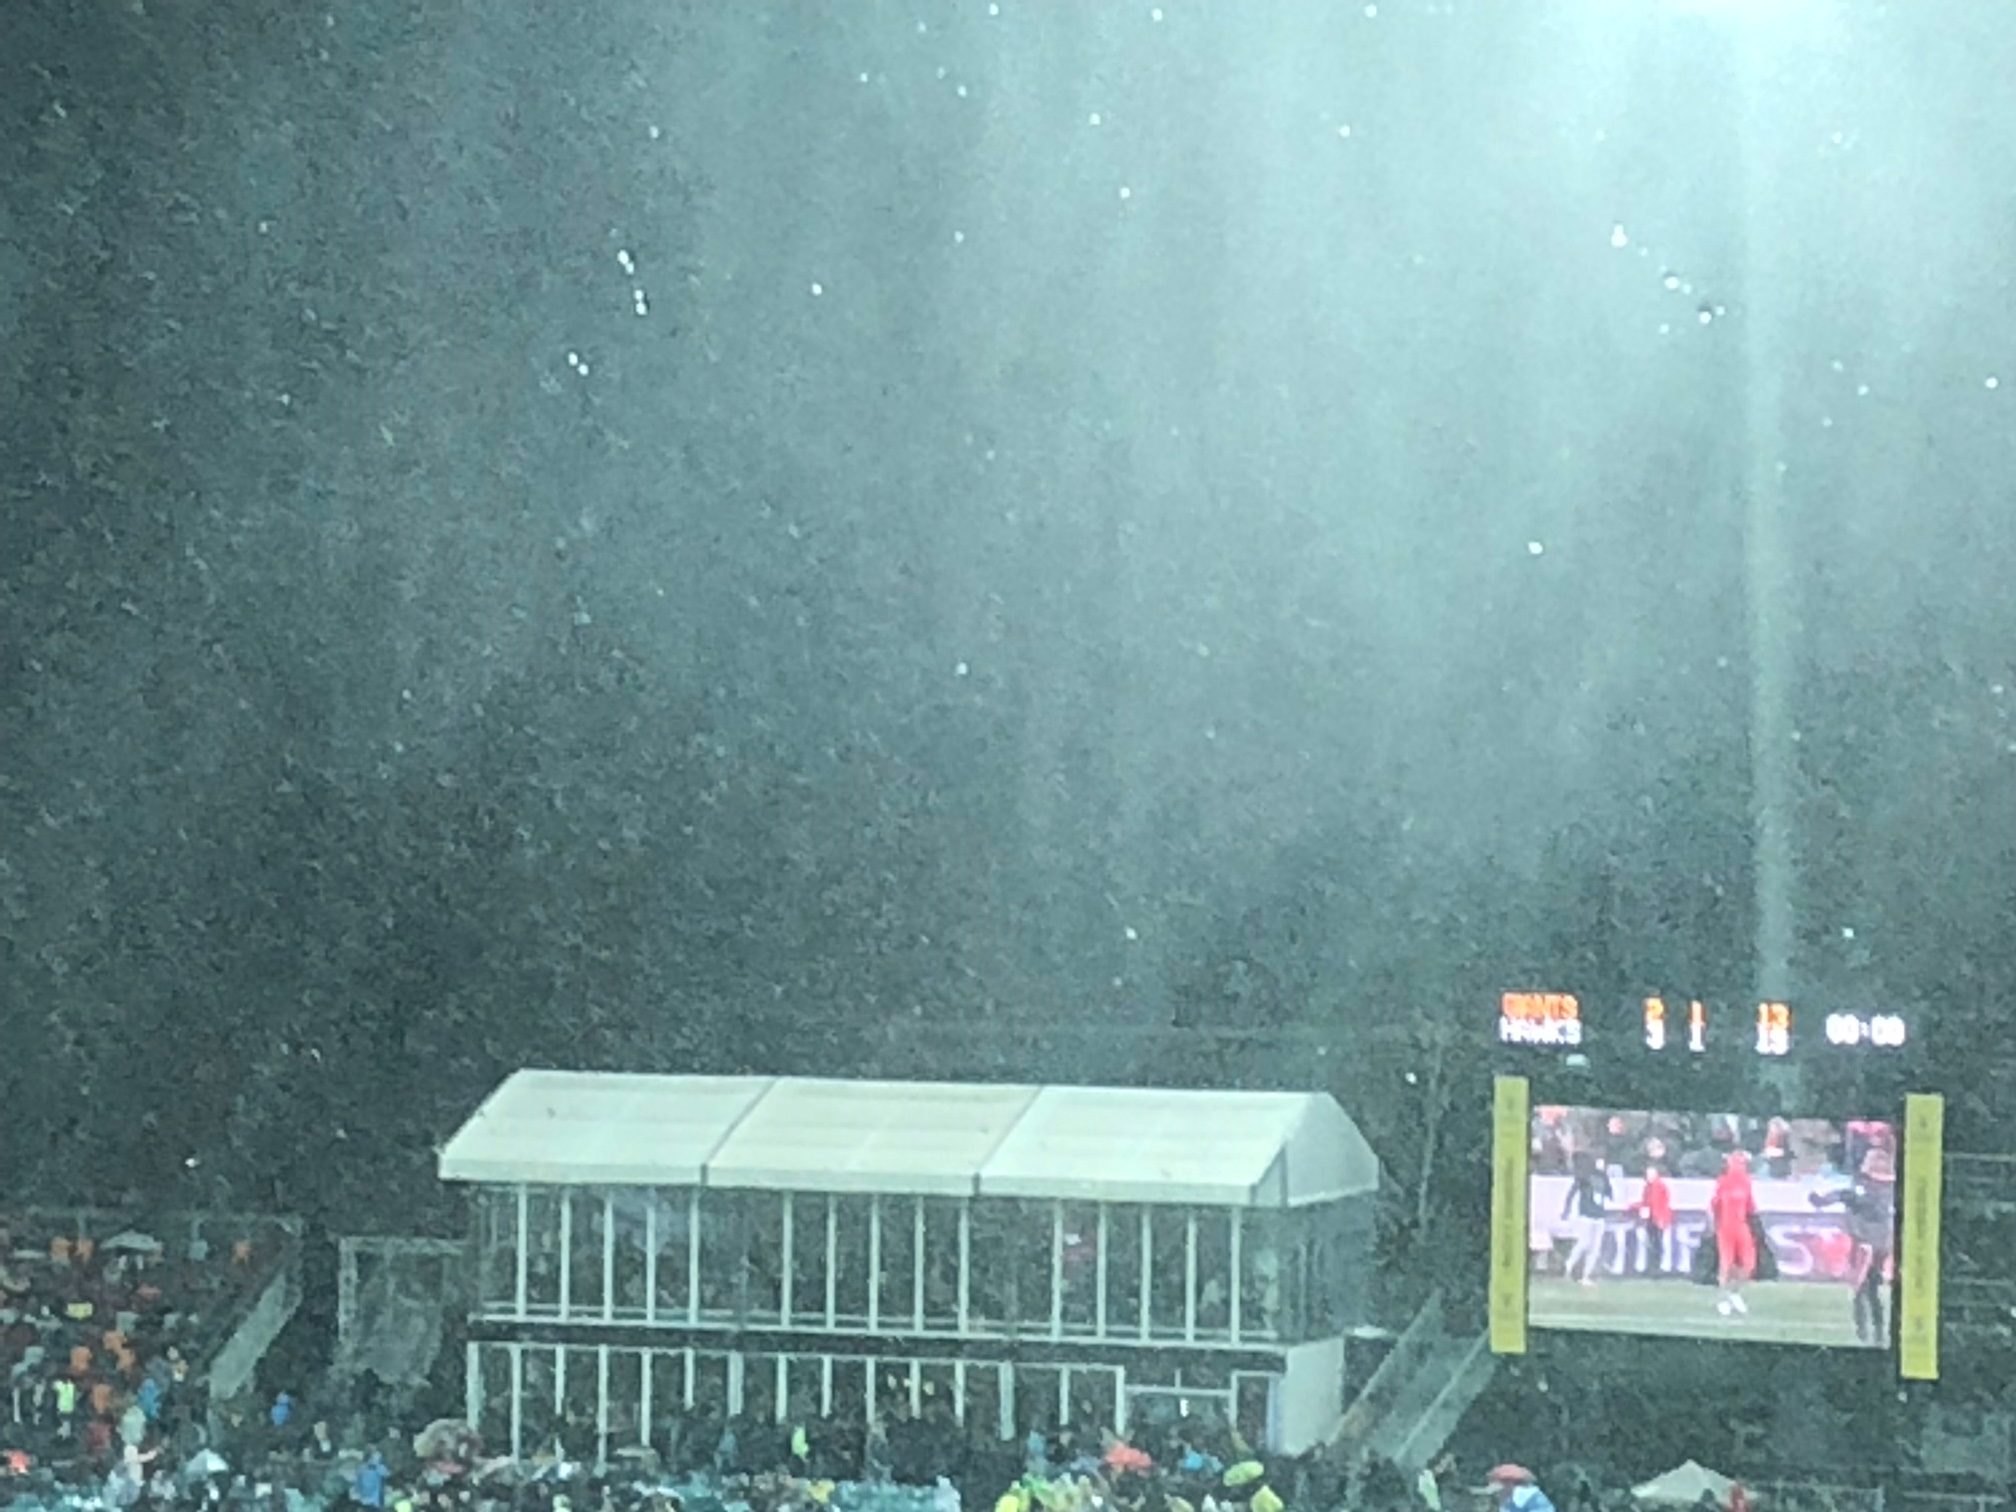 There's no business like snow business - an AFL game that will go down in history